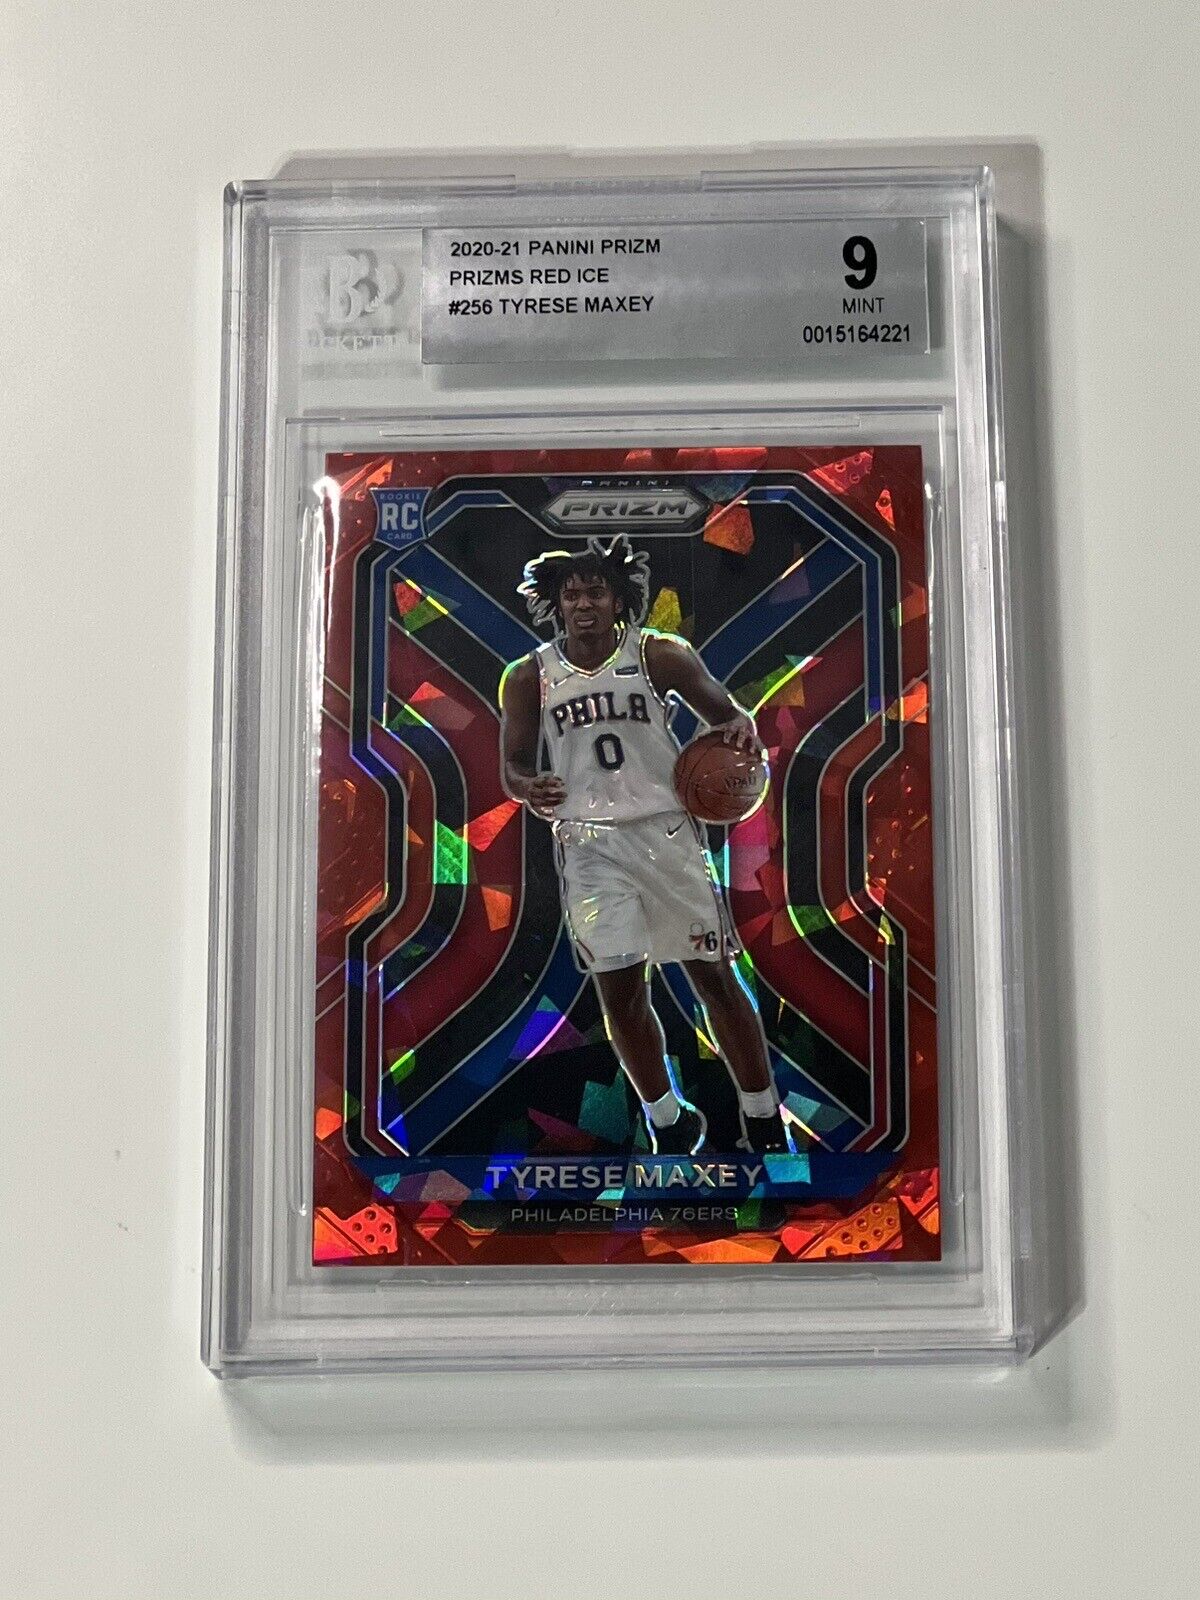 2020 Panini Prizm Tyrese Maxey Red Ice Rookie RC BGS 9 #256 76ers SP